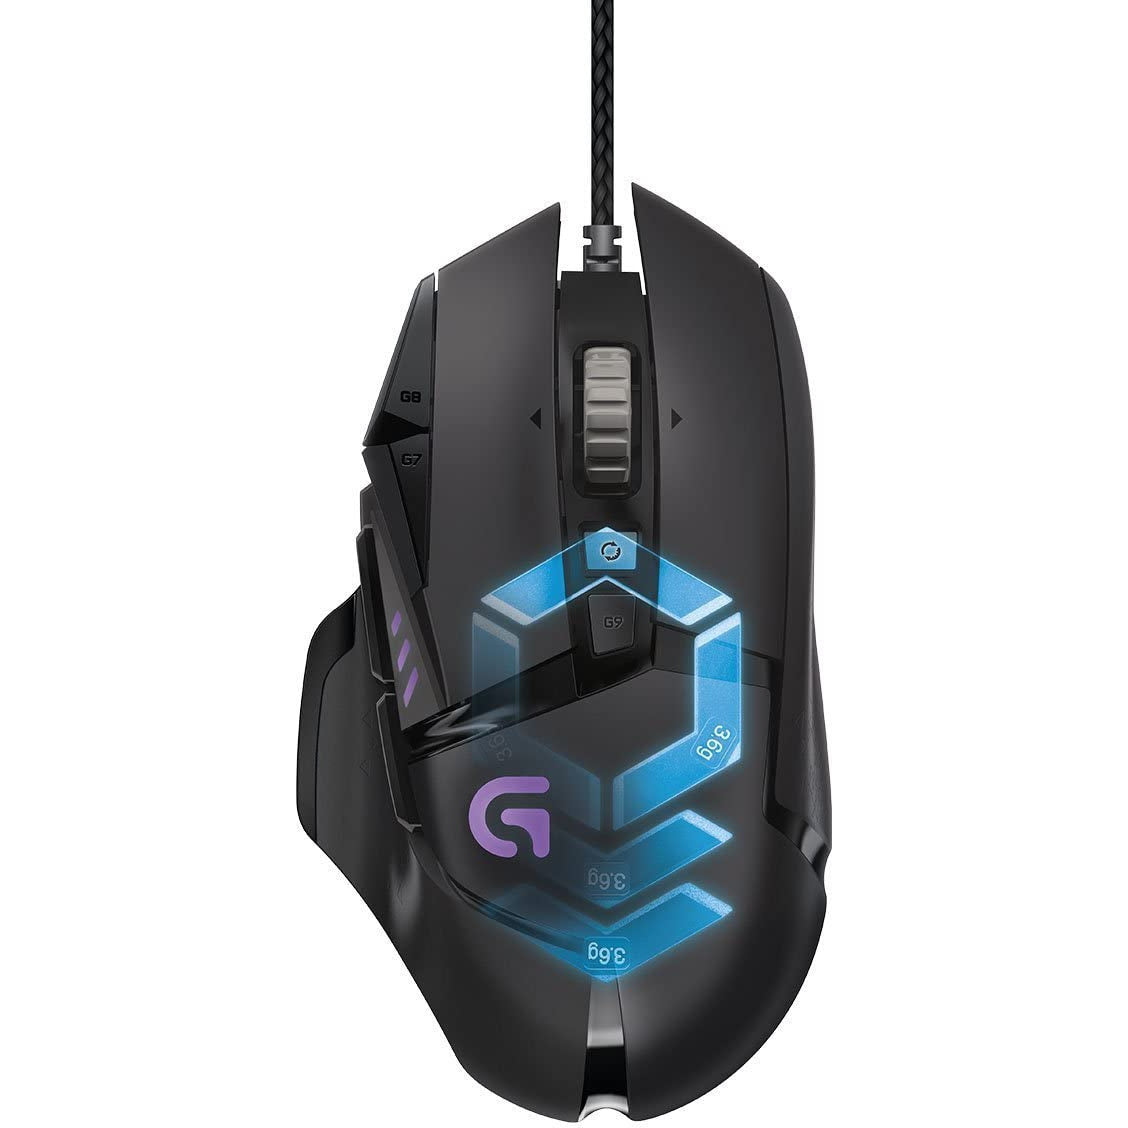 Logitech G502 Proteus Spectrum RGB Tunable Wired Gaming Mouse, Black - Refurbished Good